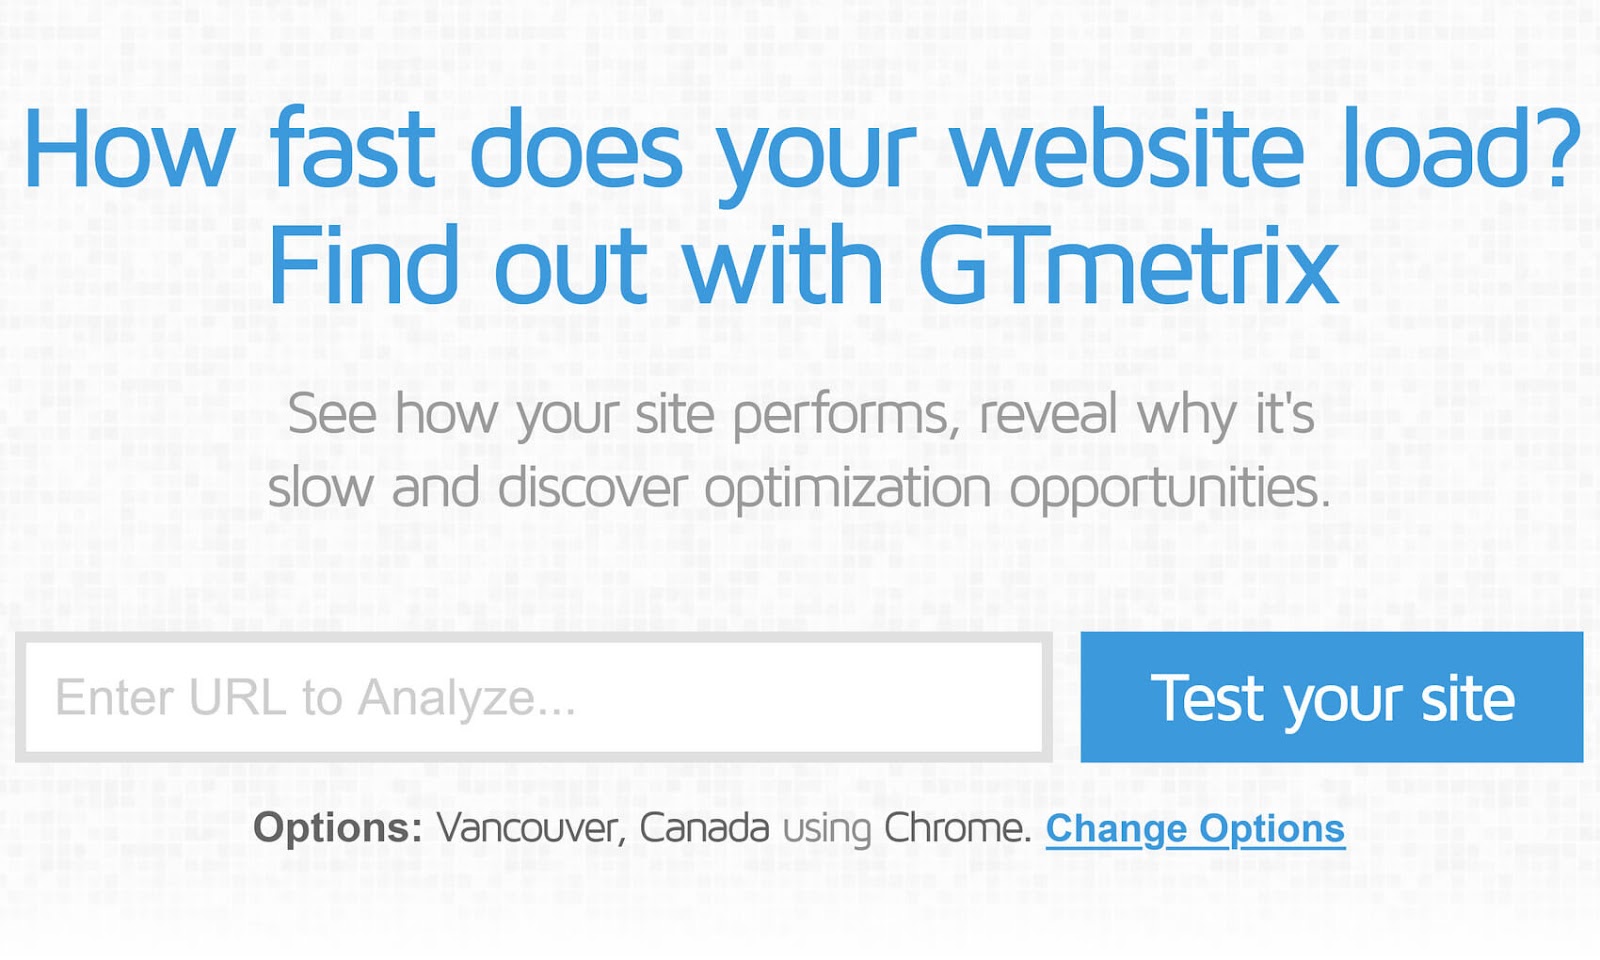 GTmetrix website speed test tool with a search box to enter a URL and a blue "Test your site" button.